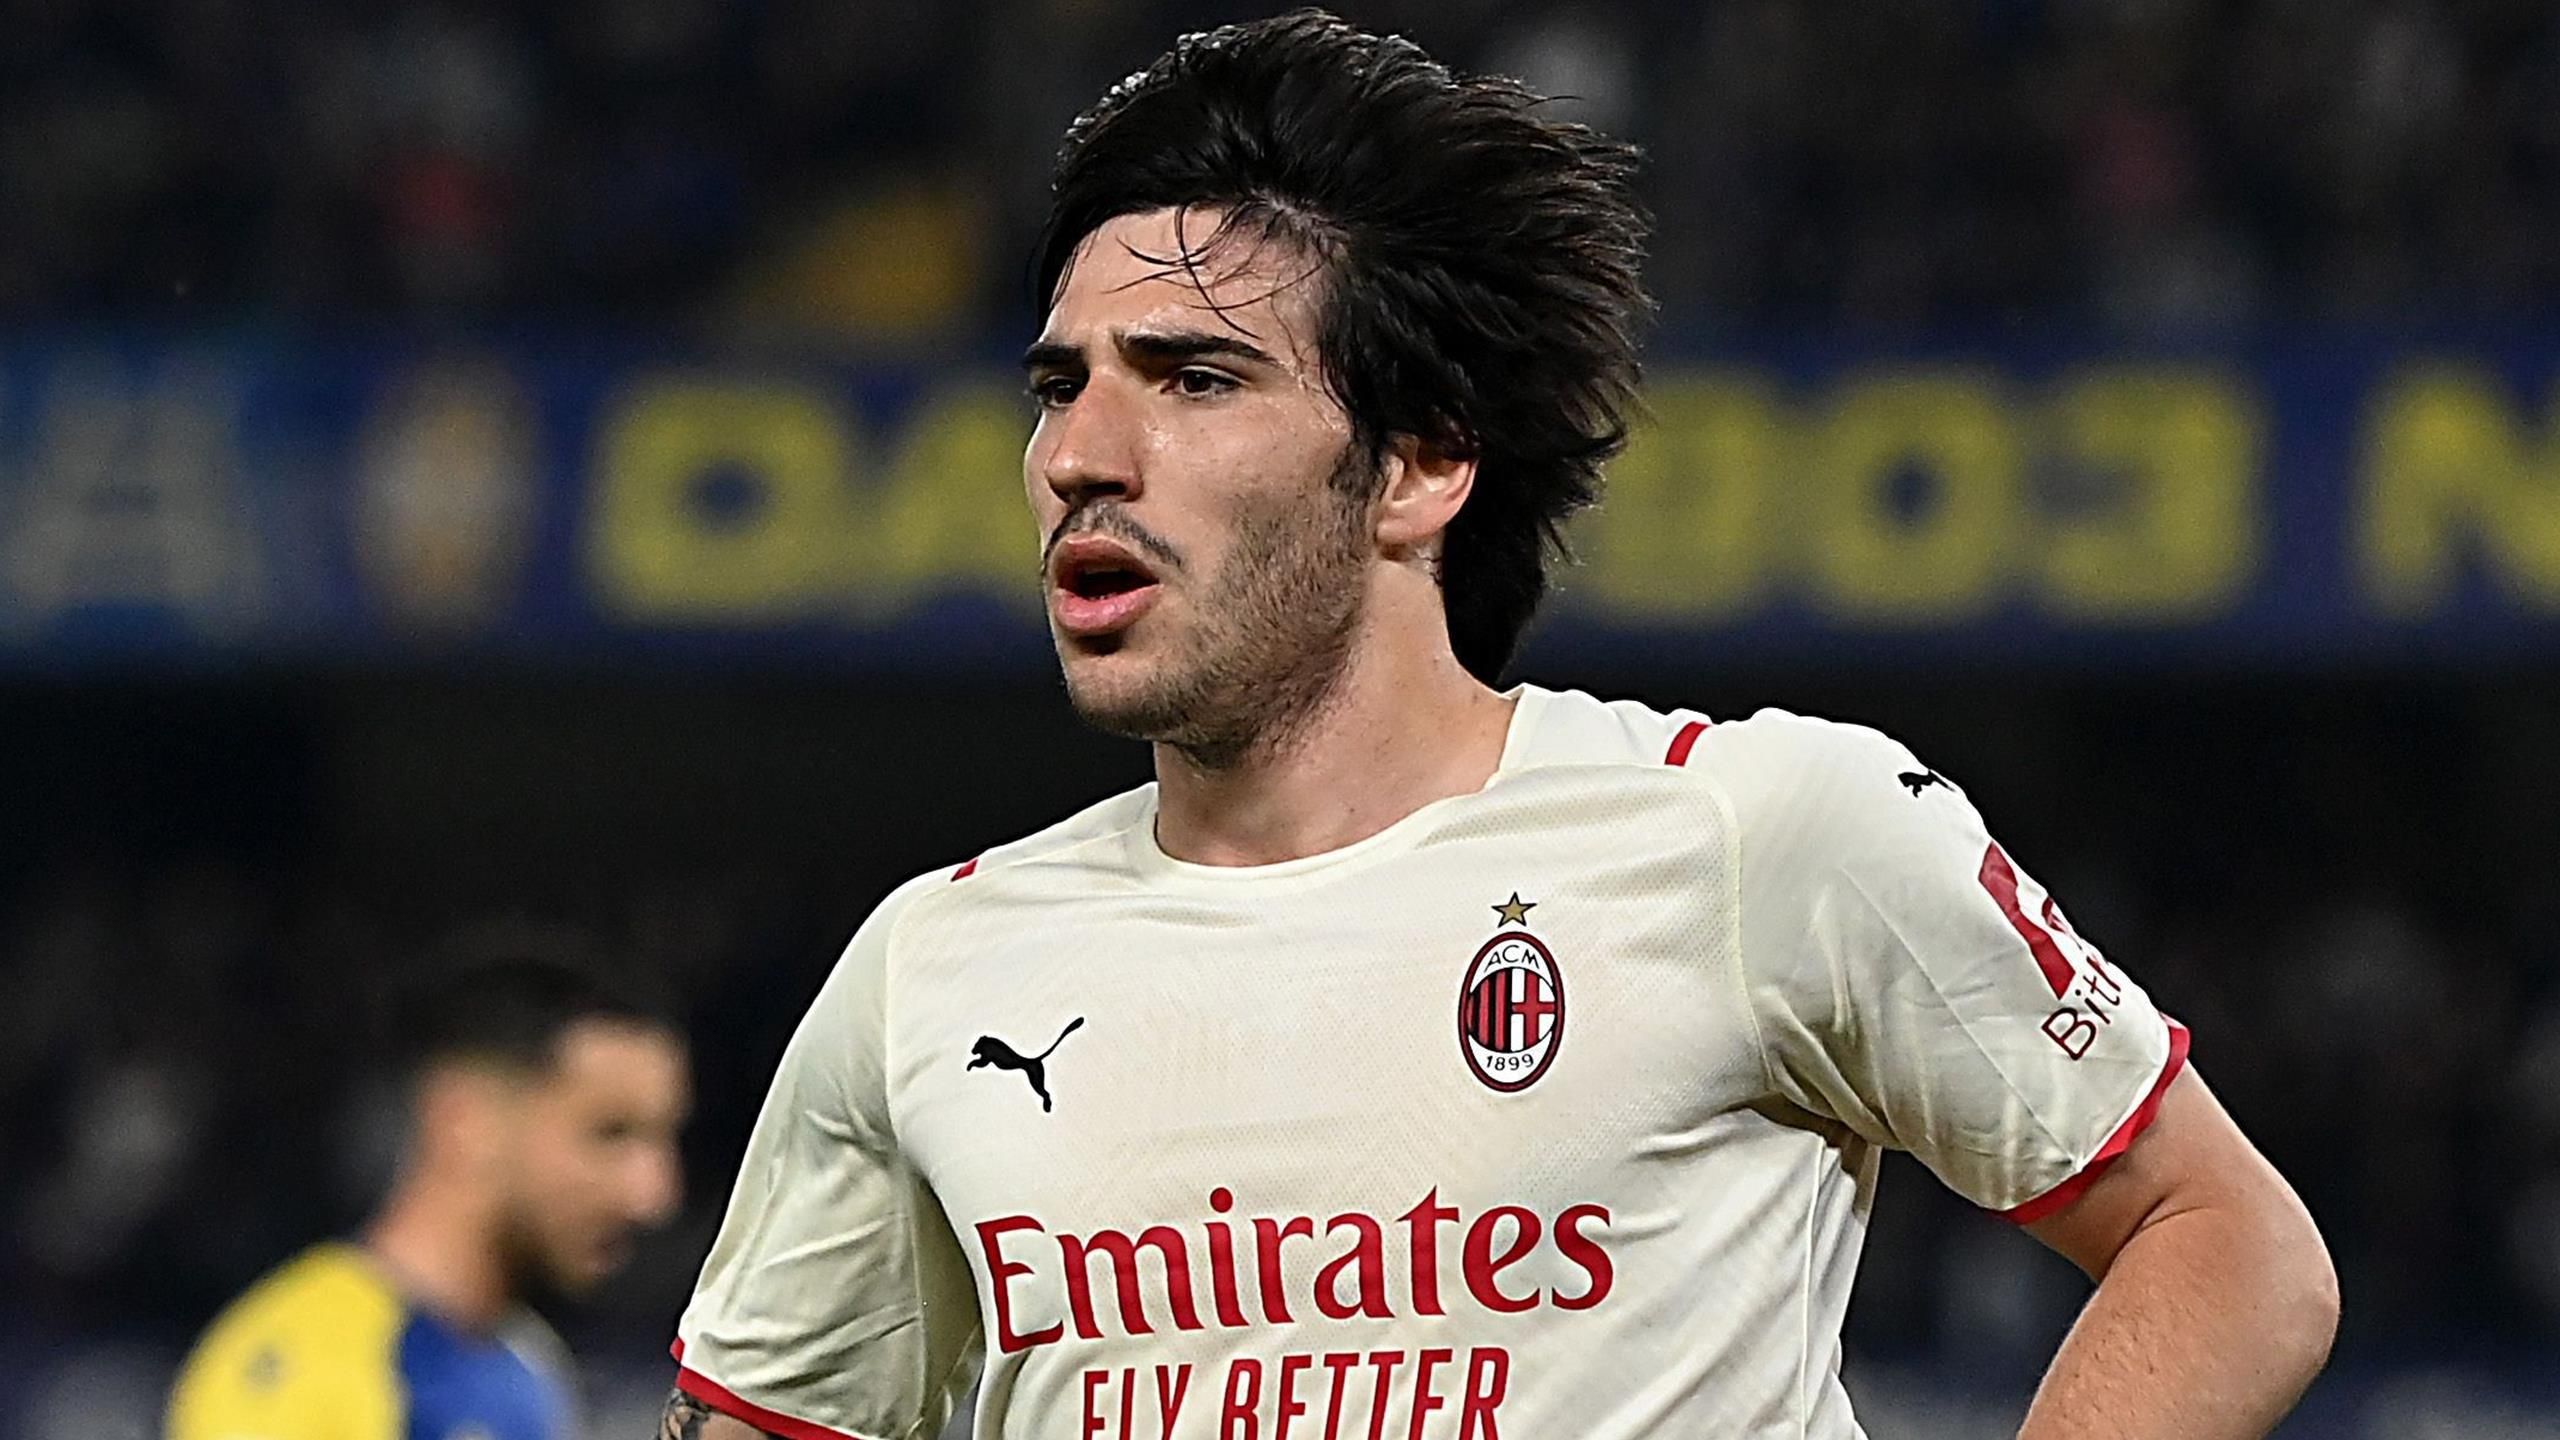 Milan rally to beat Verona and move step closer to Serie A title with Sandro Tonali and Leao starring - Eurosport